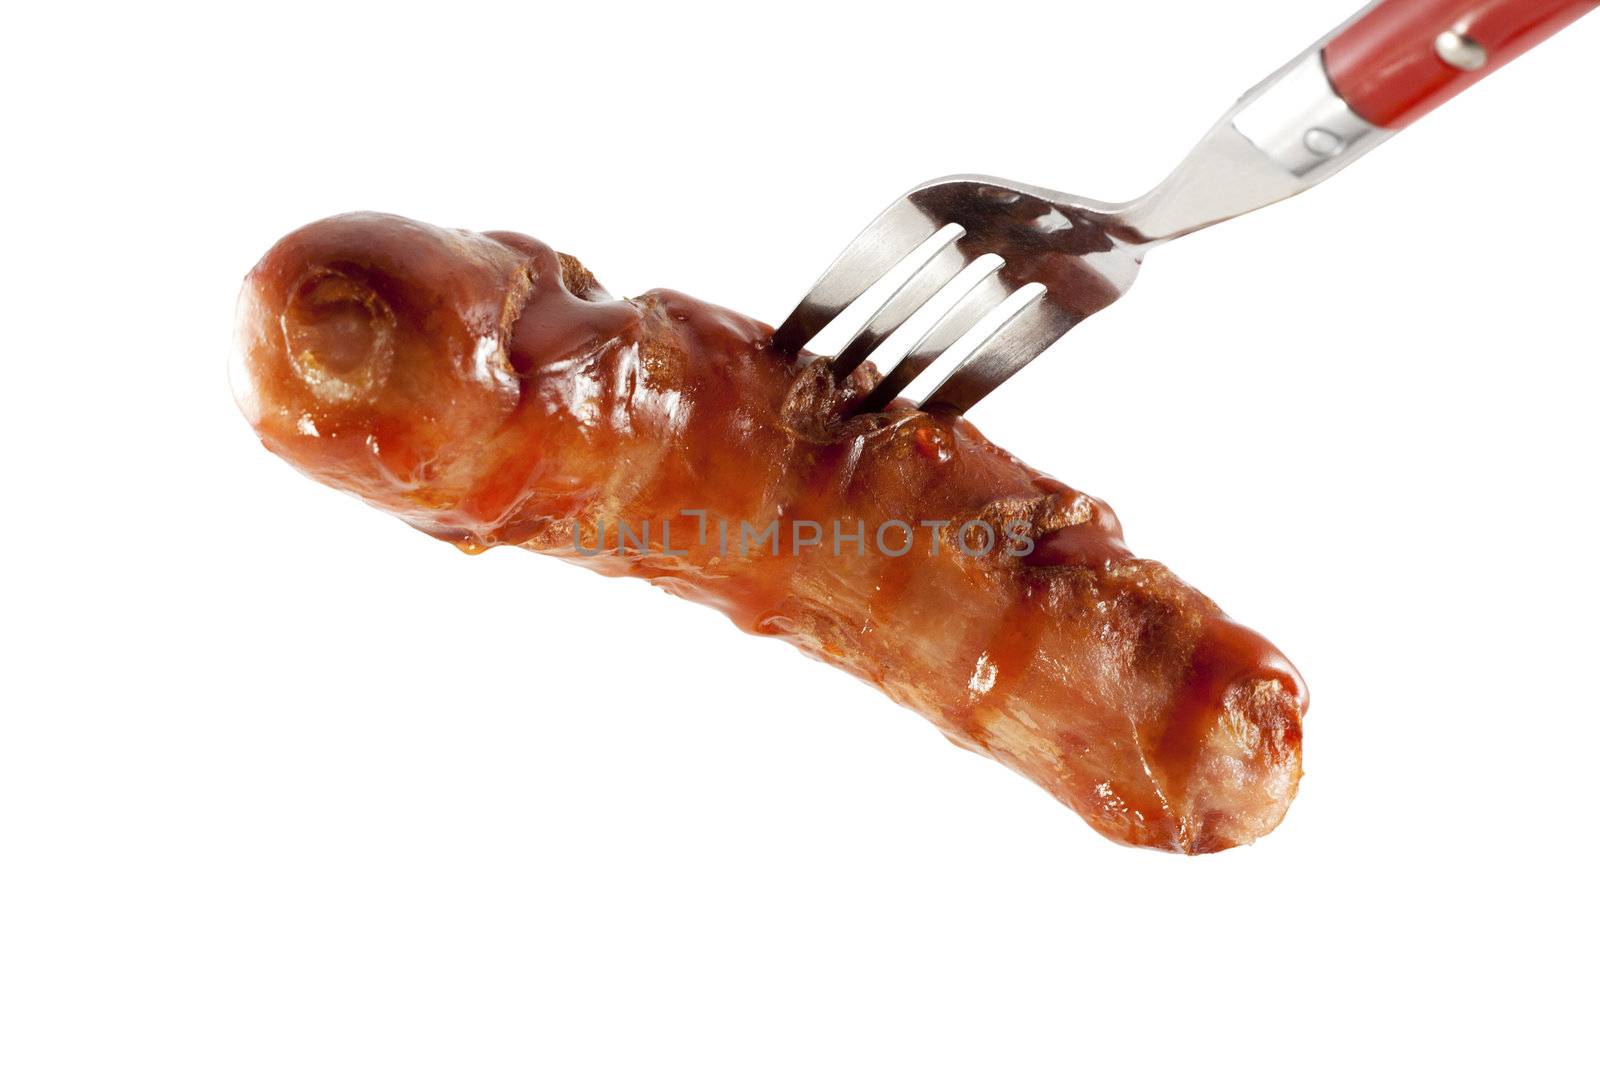 Fried sausage on a fork isolated on white